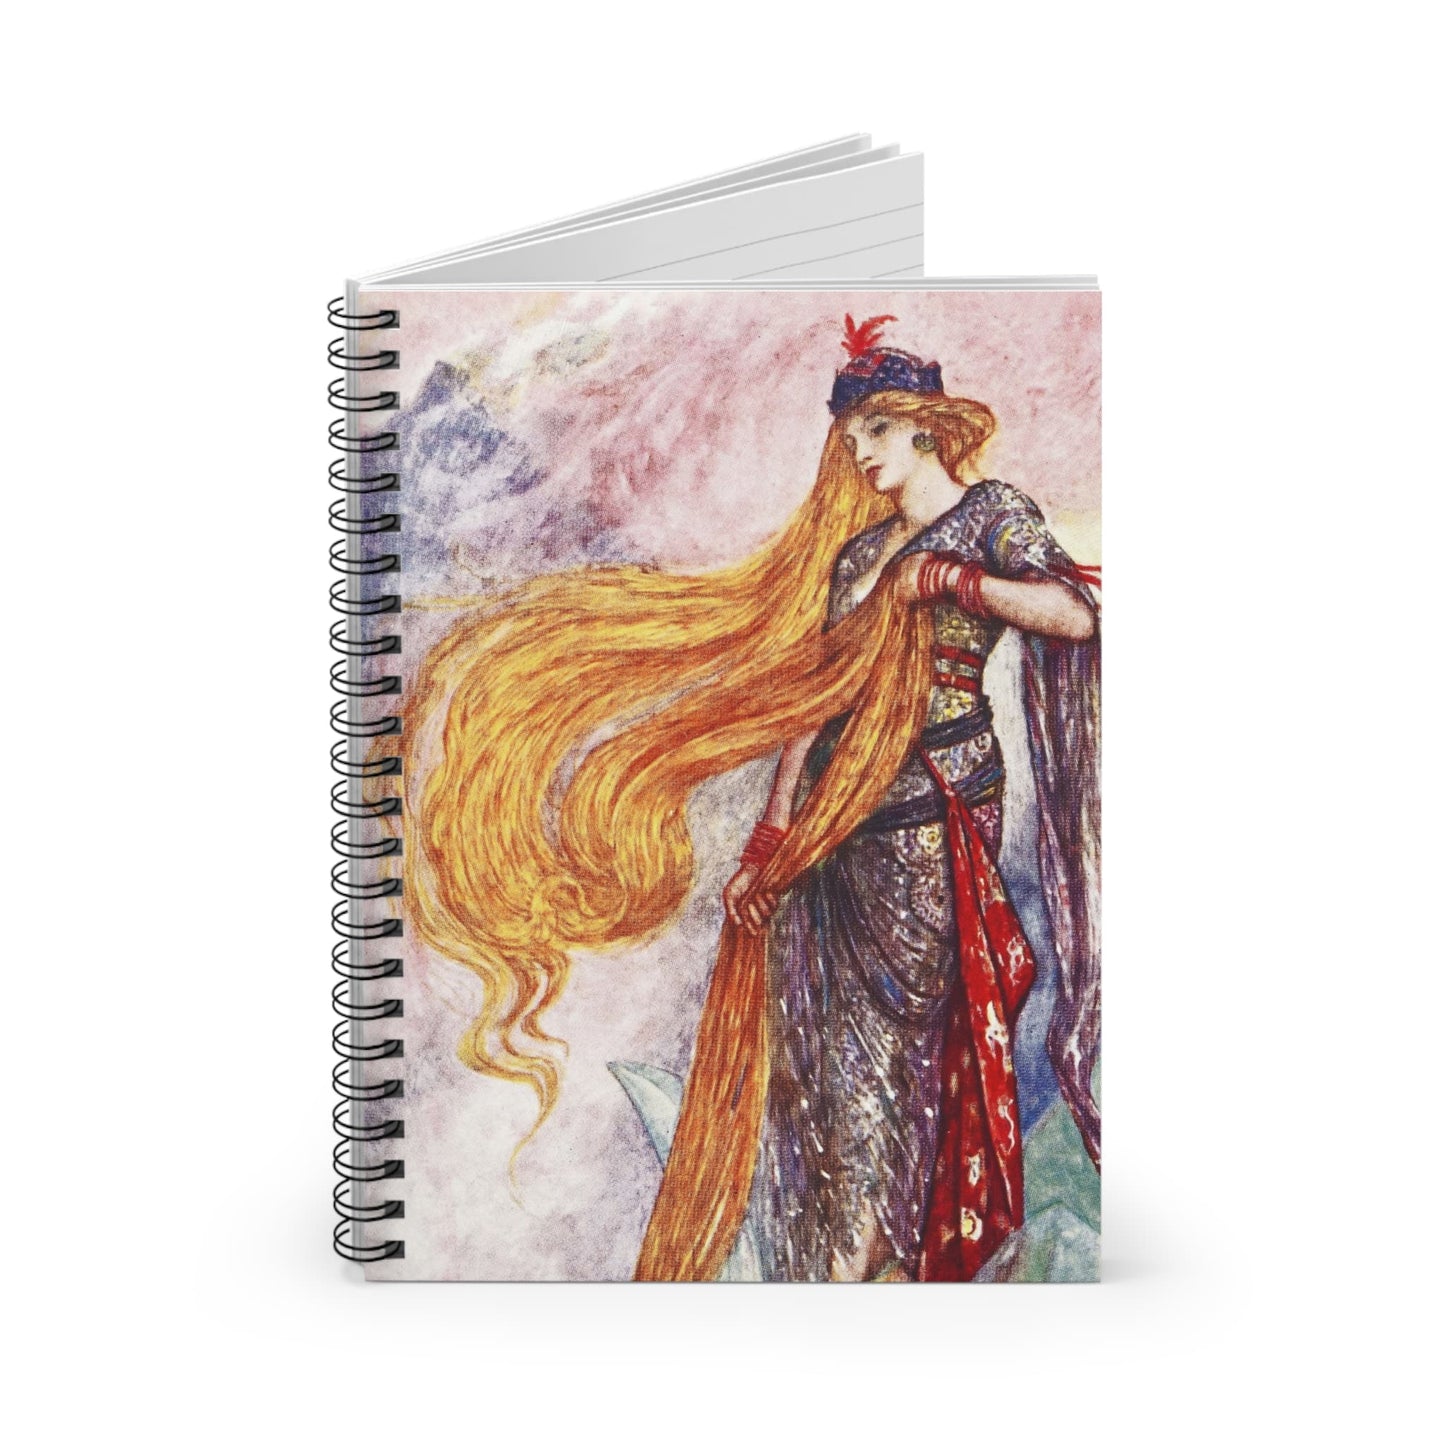 Vintage Fairy Tale Spiral Notebook Standing up on White Desk